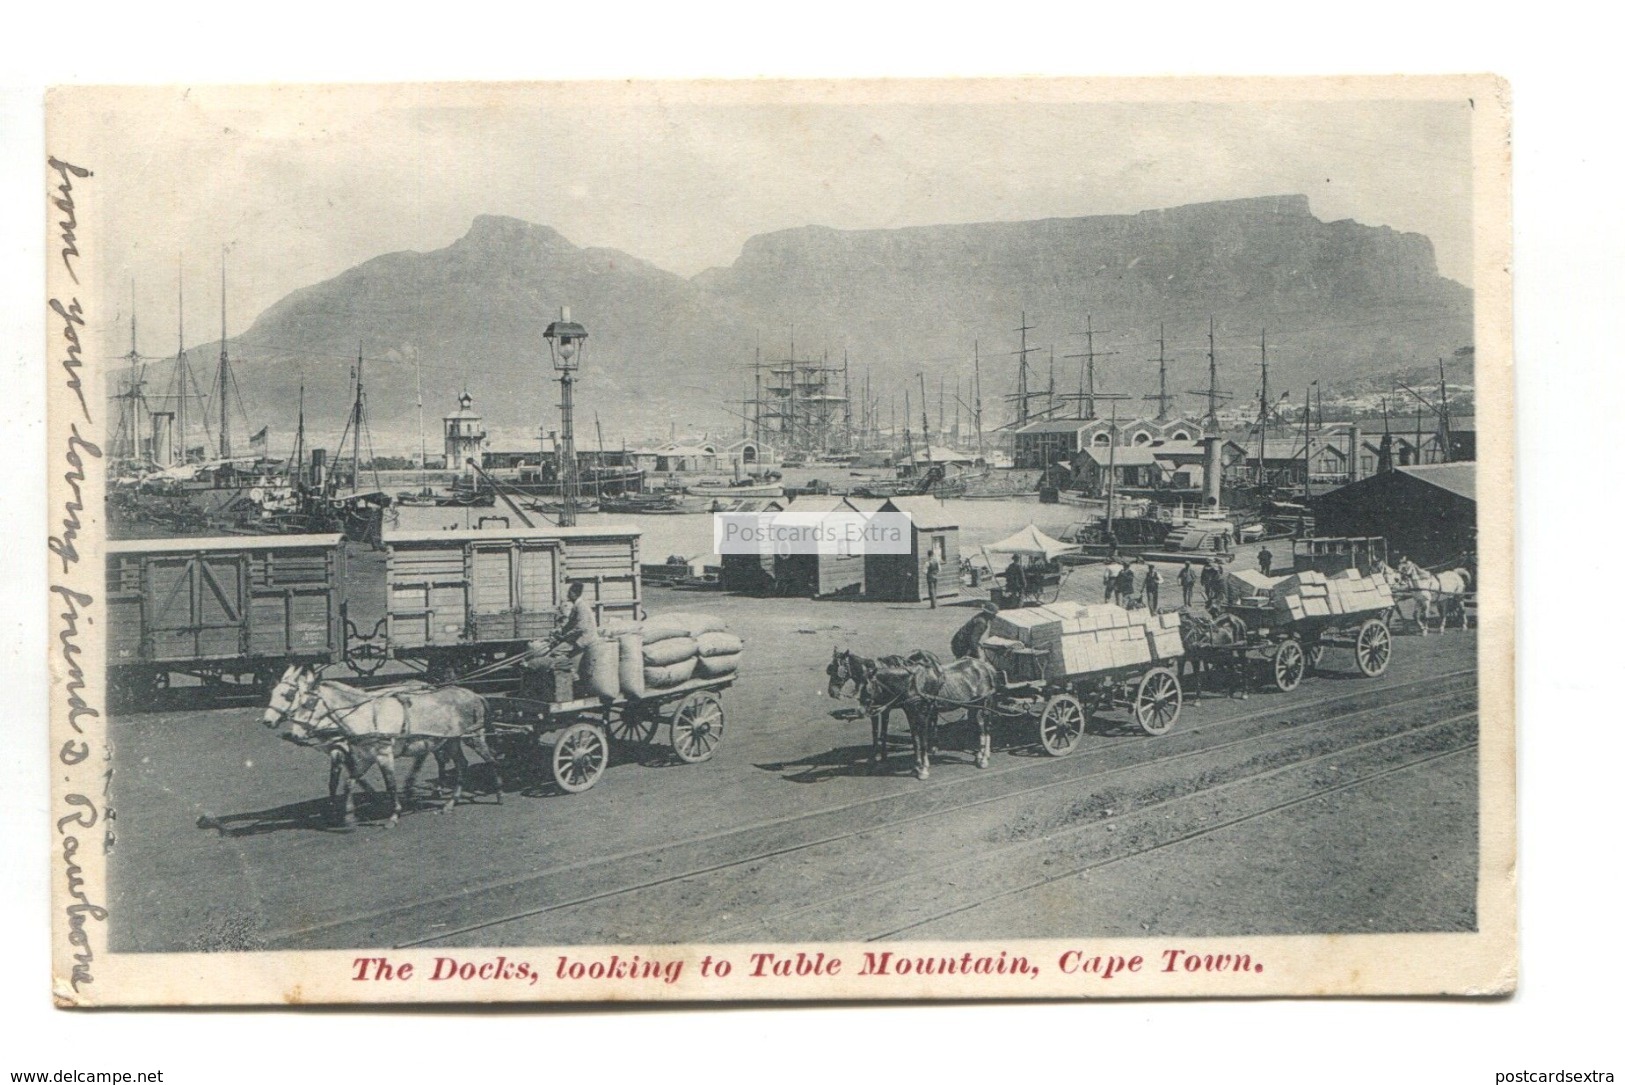 Cape Town - The Docks, Table Mountain, Horse Wagons, Tall Ships - Old South Africa Postcard - South Africa